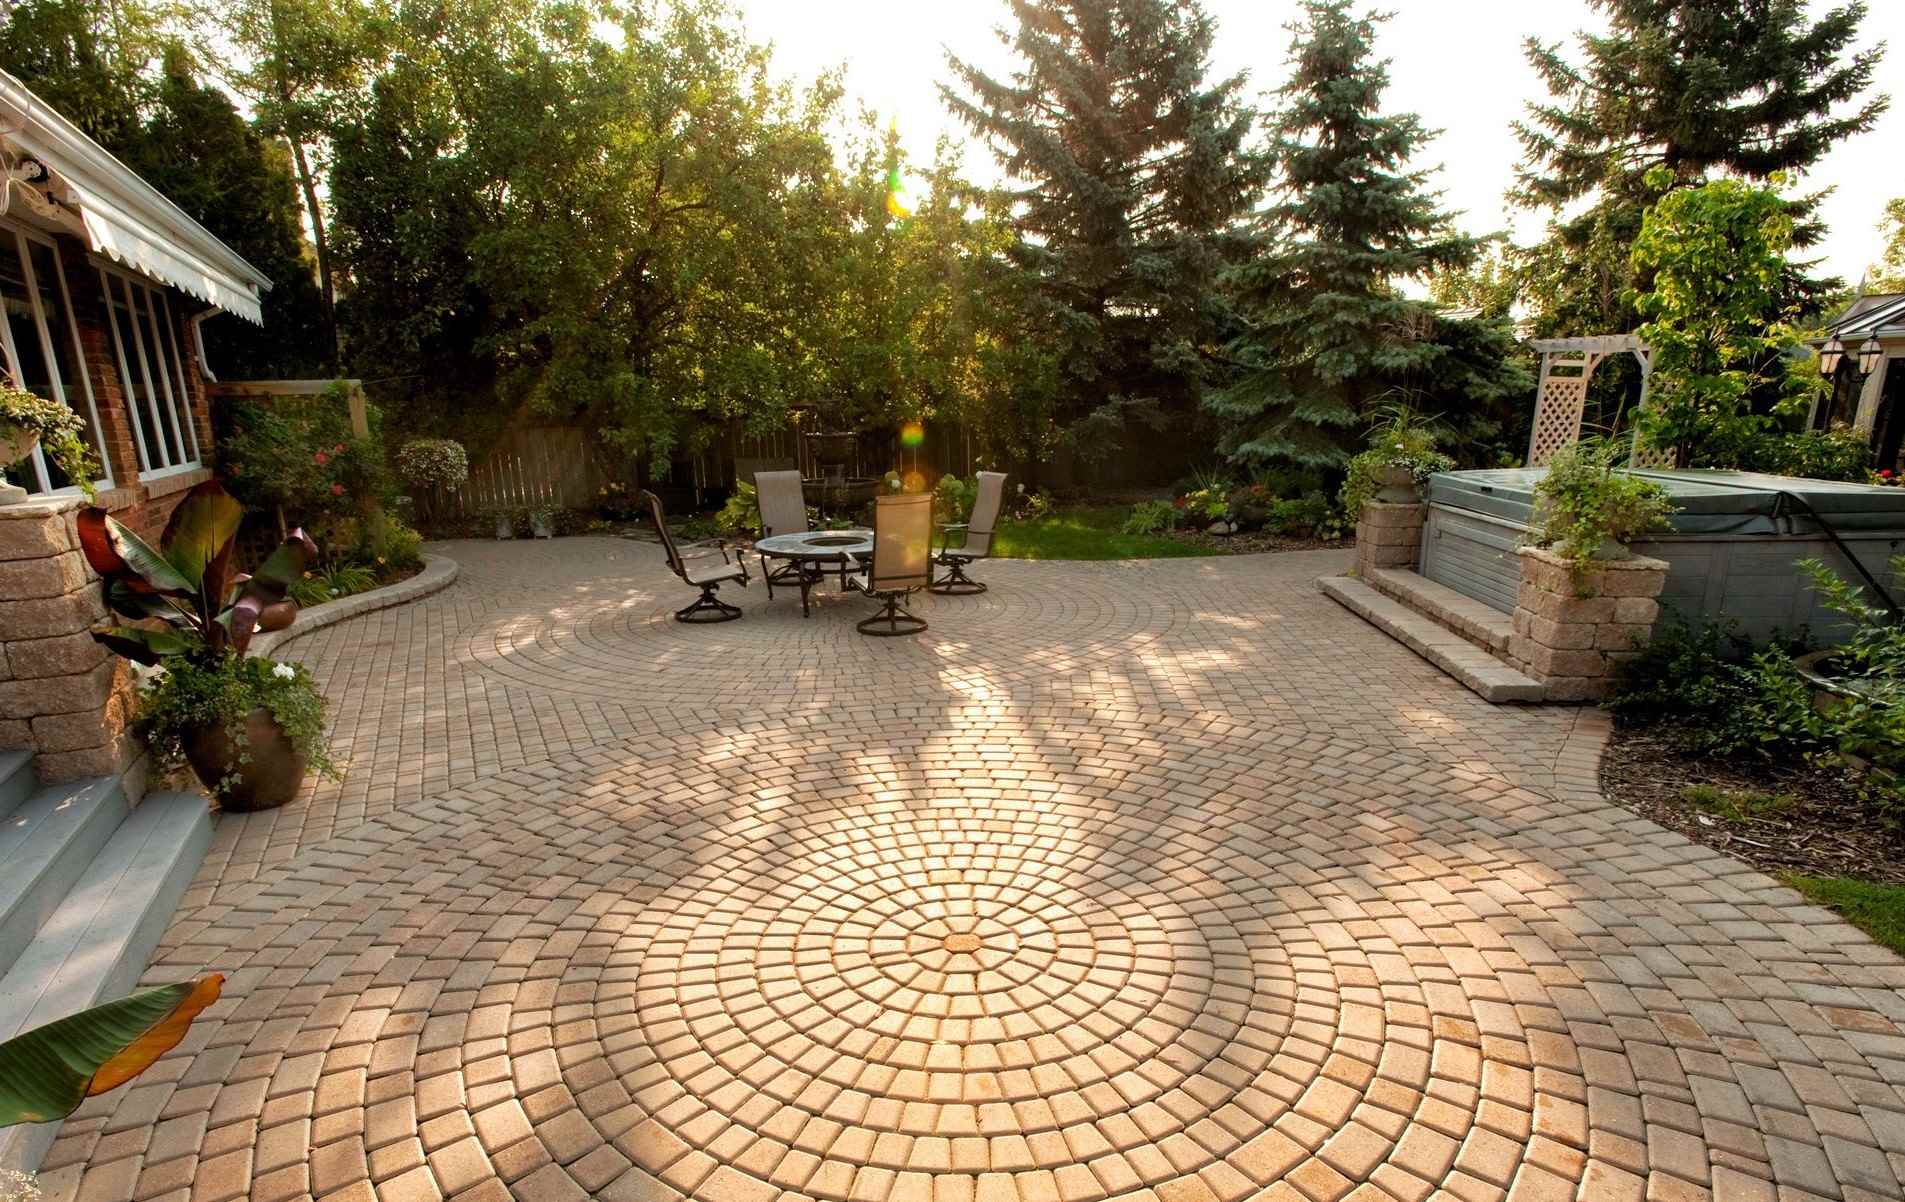 How Much Does It Cost To Put Pavers In Backyard